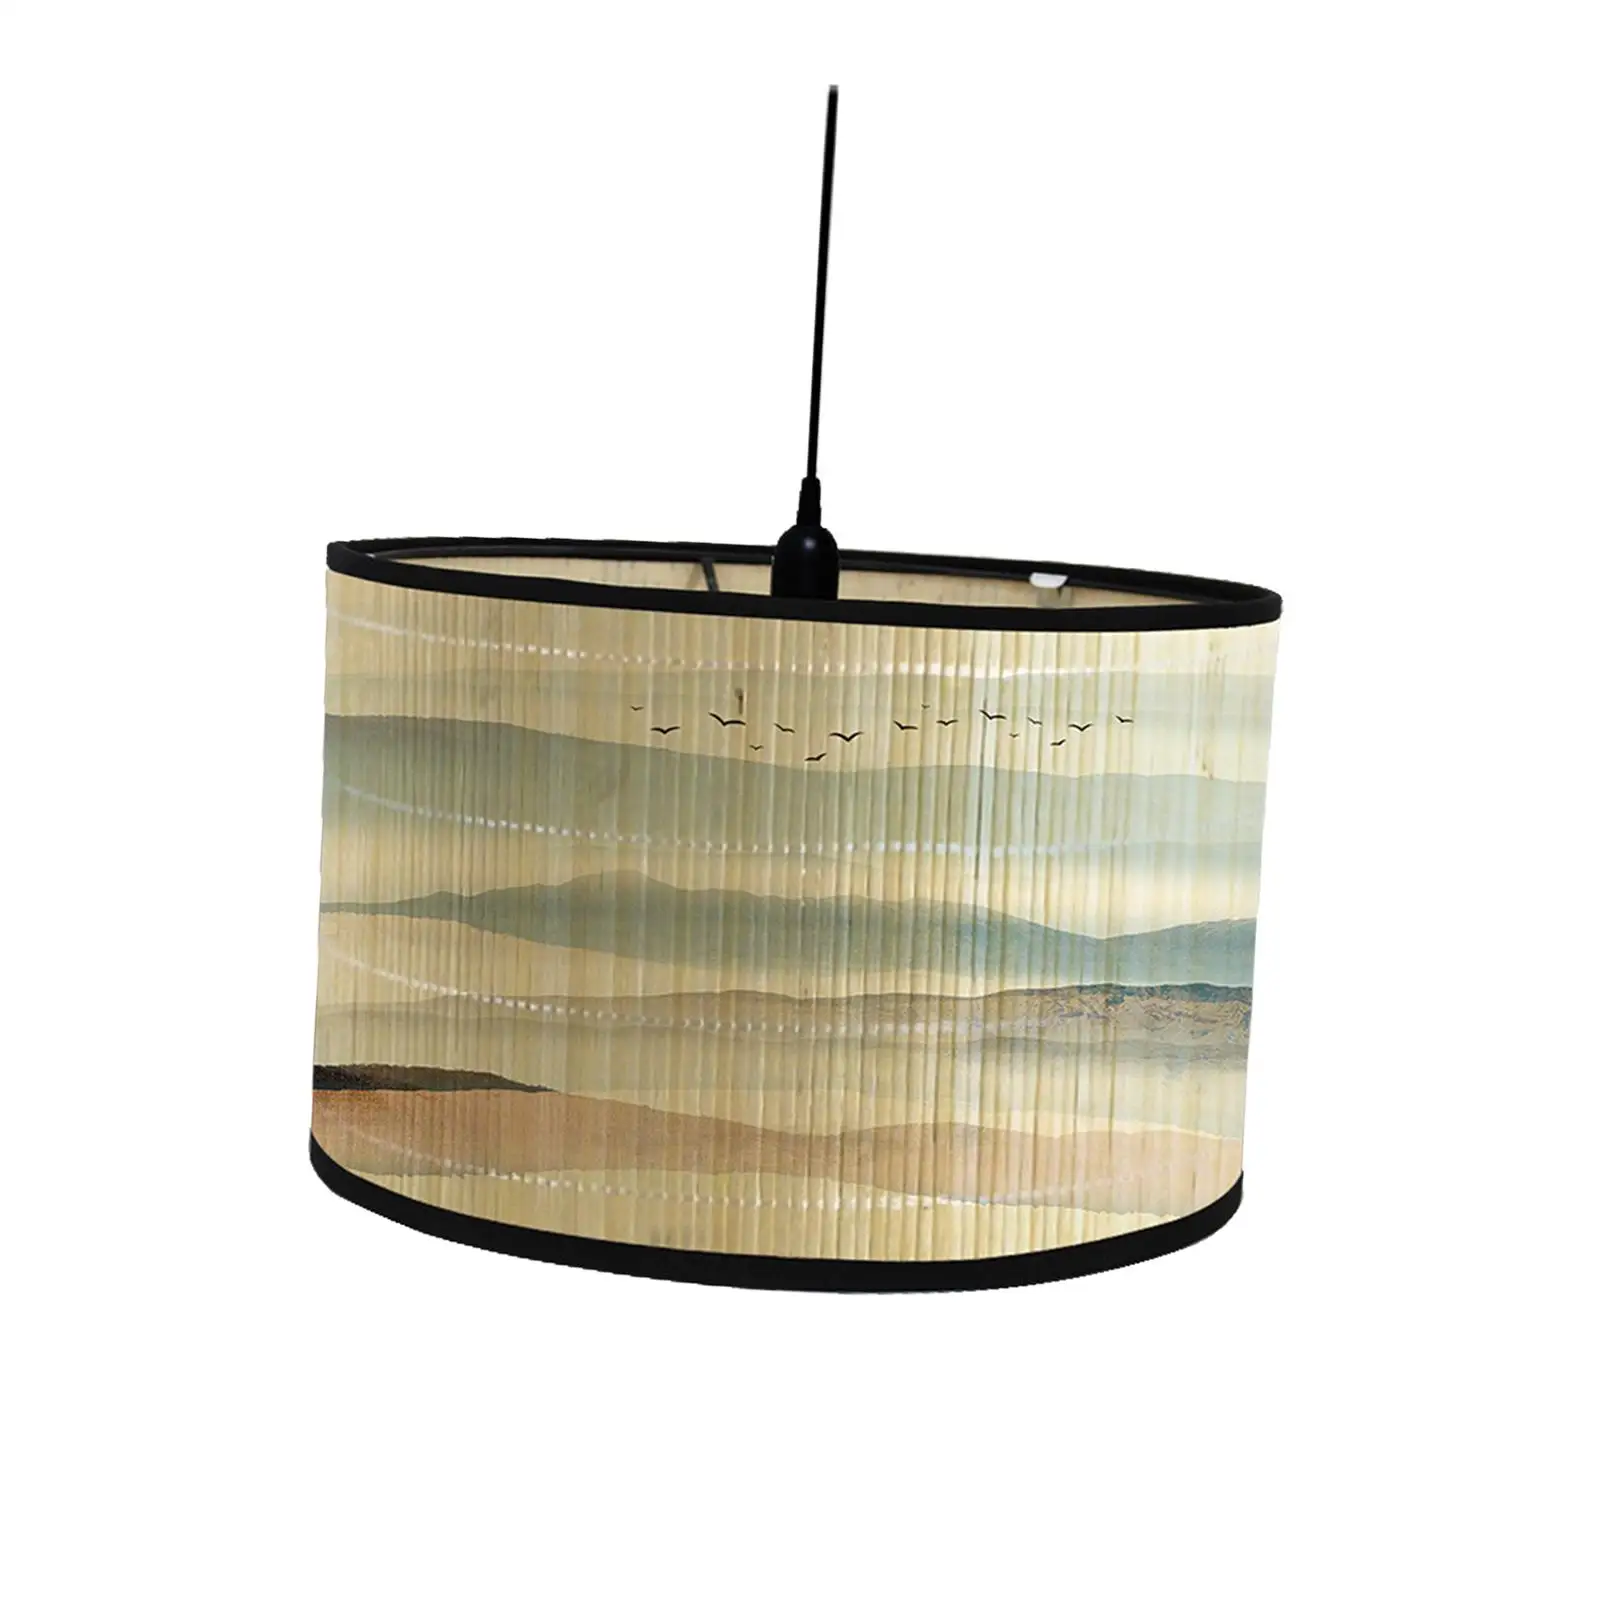 Drum Print Lamp Shade 11.8x11.8x8 inch E27 Retro Folk Light Cover Bamboo Lampshade Only for Hanging Pendant Desk Ceiling Lamp